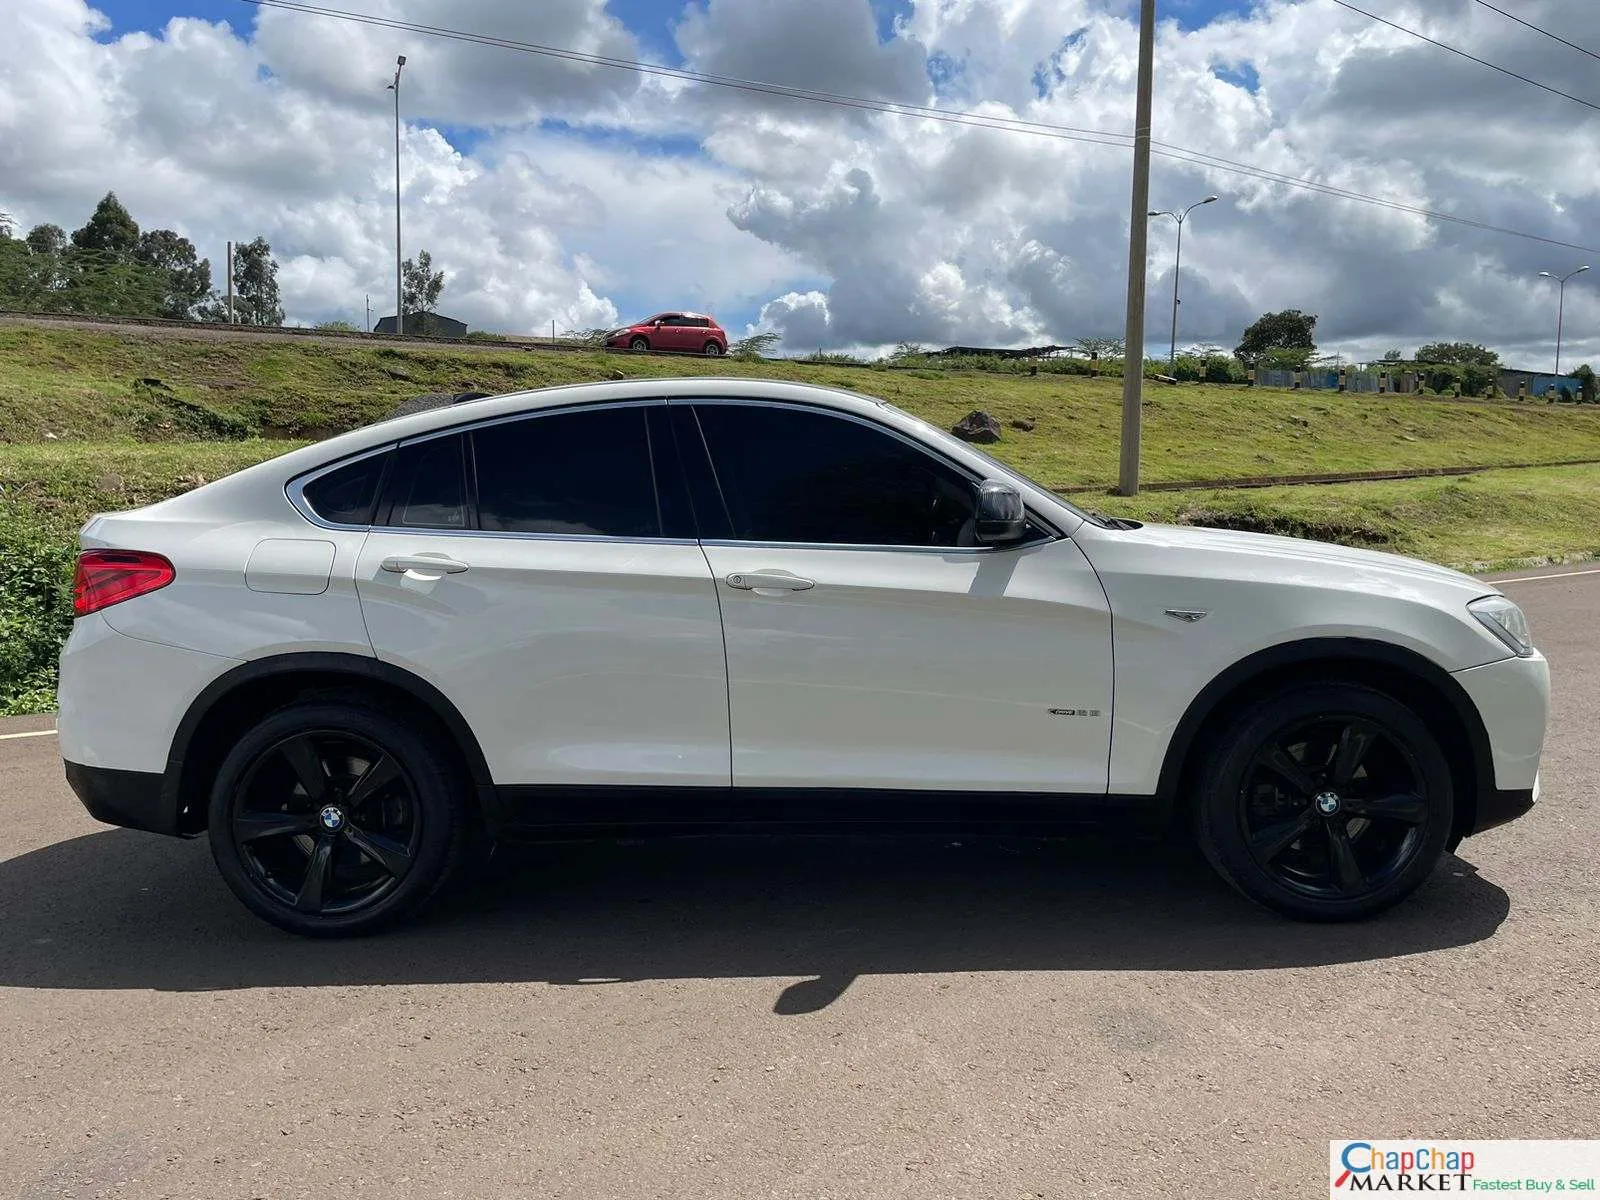 Bmw X4 for sale in kenya fully loaded hire purchase installments You Pay 30% deposit Trade in Ok Exclusive